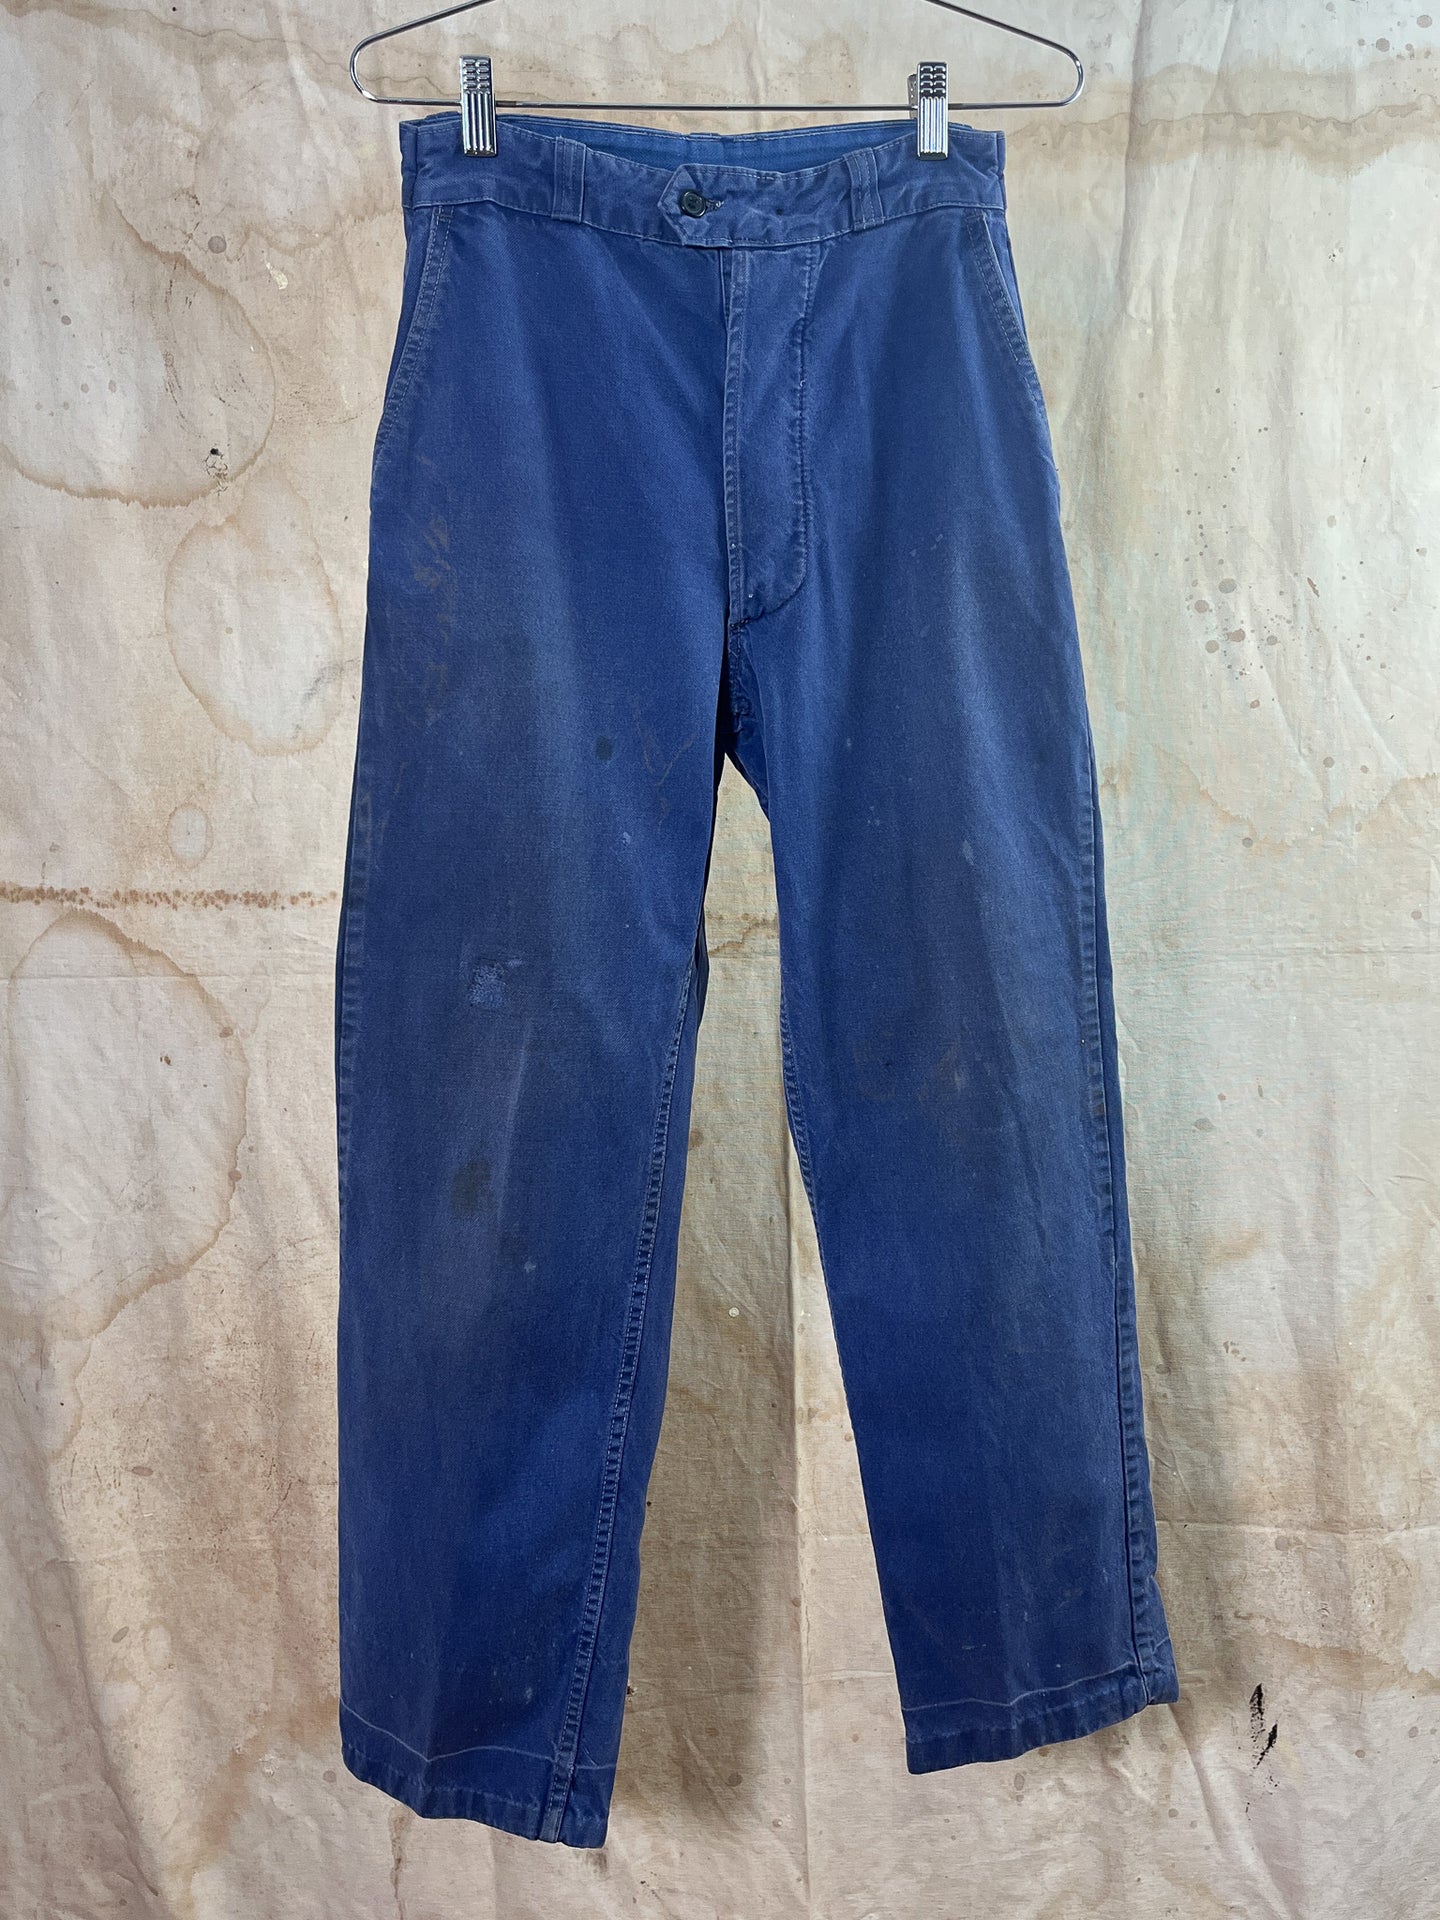 French Blue Cotton Twill Work Trousers c. 1950s